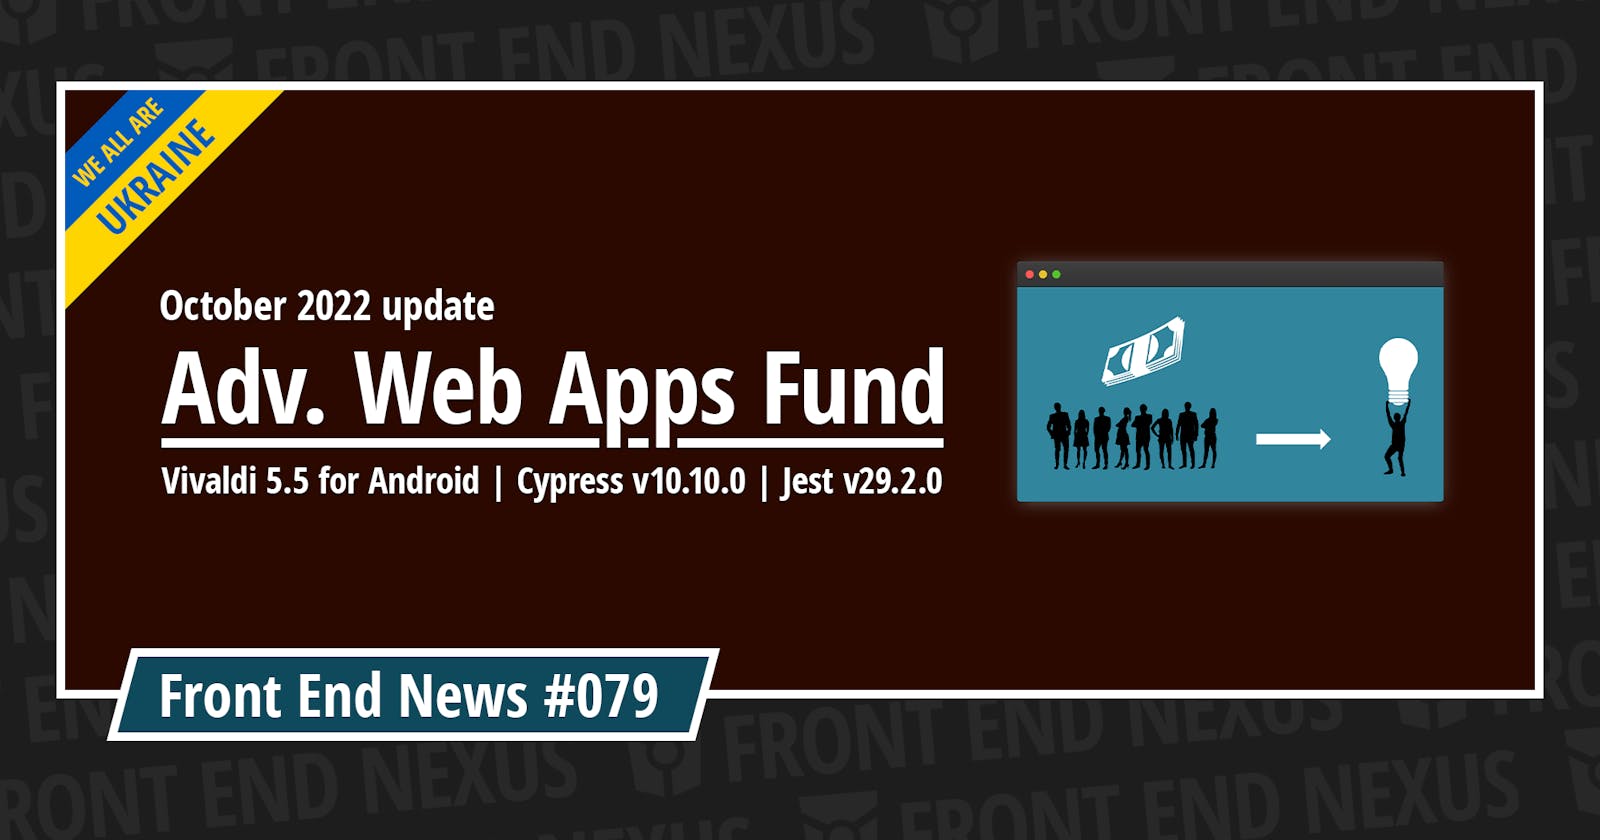 Adv. Web Apps Fund October 2022 update, Vivaldi 5.5 for Android, Cypress v10.10.0, Jest v29.2.0, and more | Front End News #079